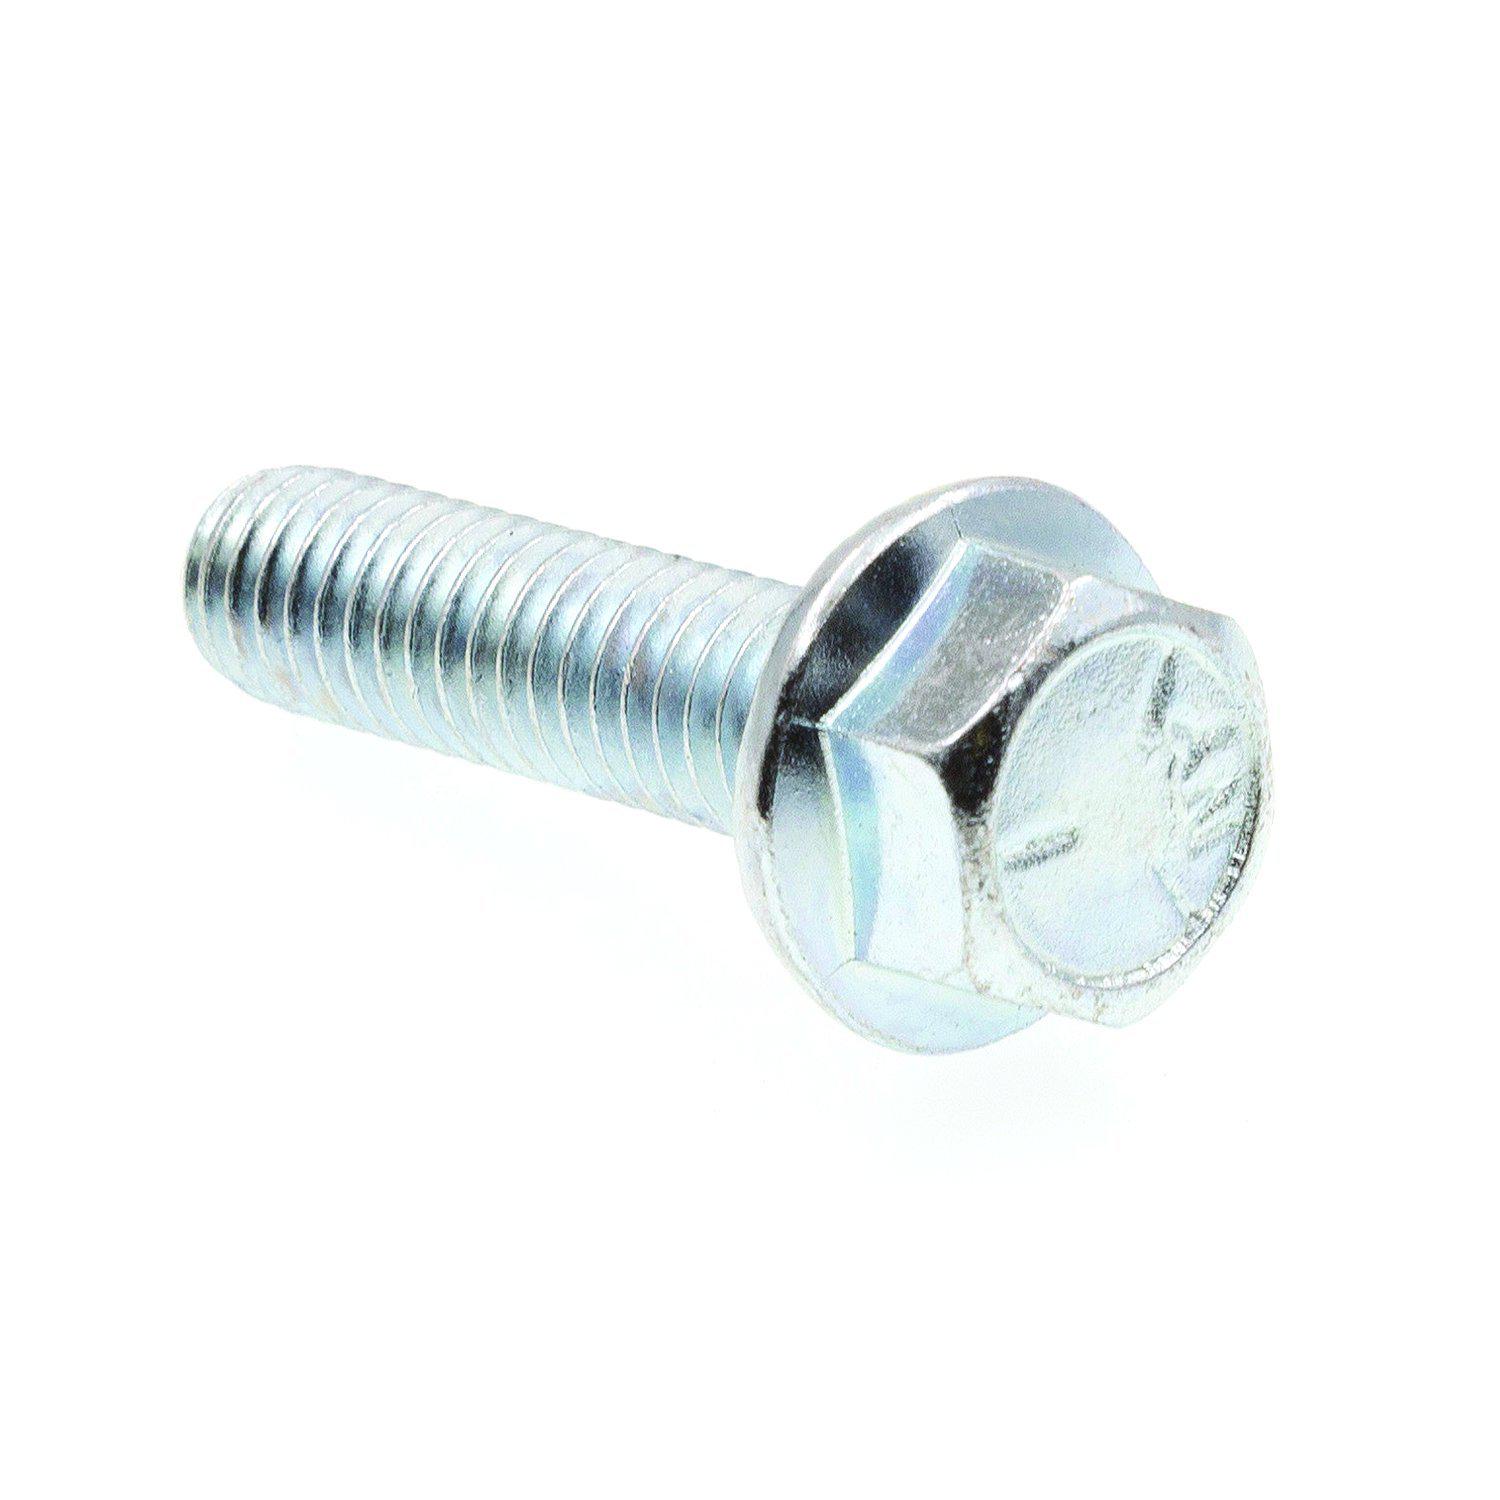 prime-line 9090931 serrated flange bolts, 5/16 inch-18 x 1-1/4 inch, zinc plated case hard